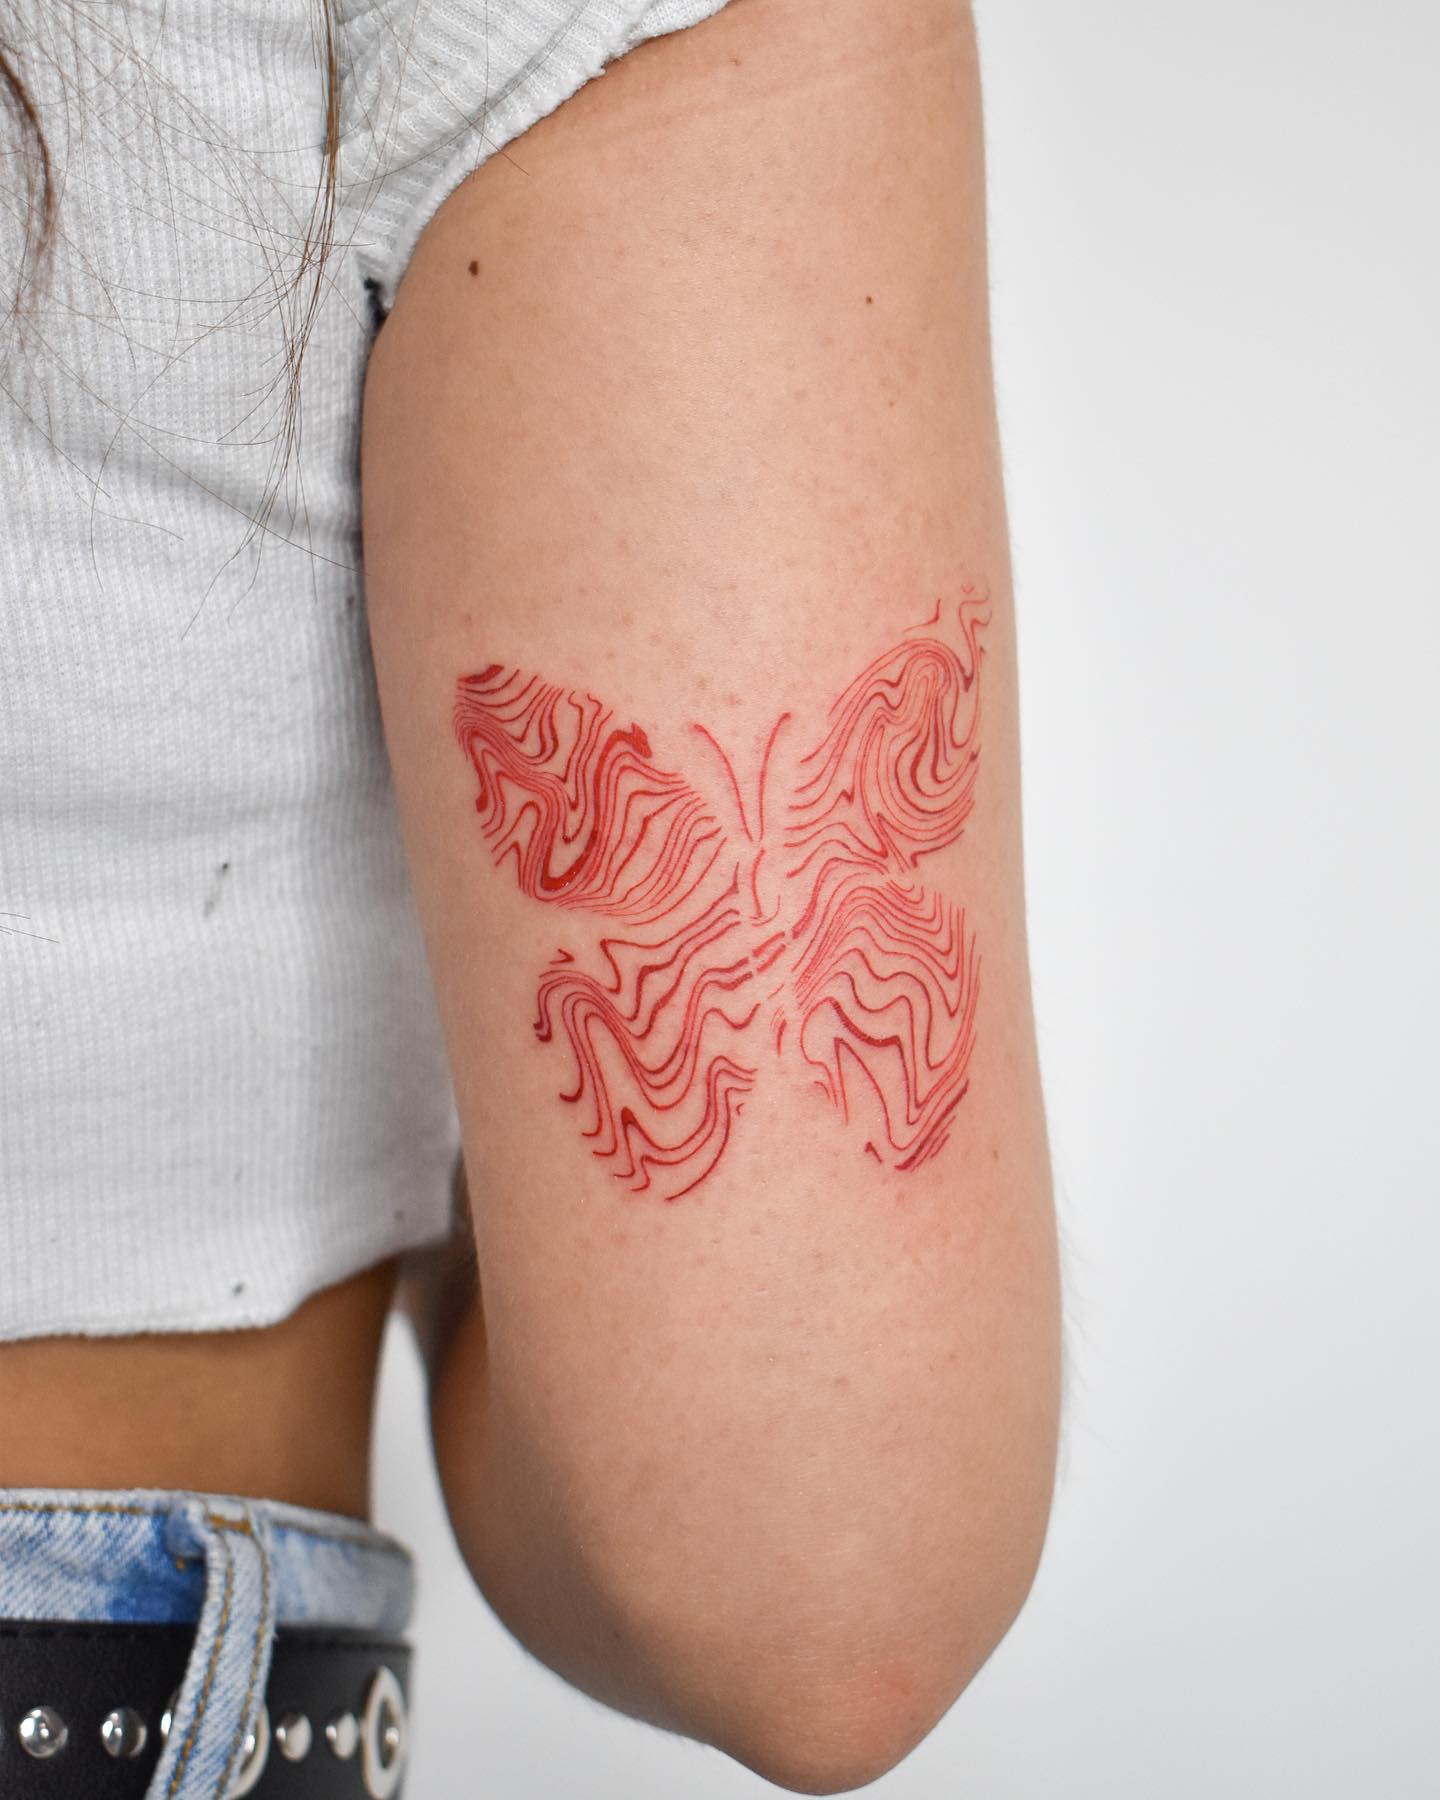 23 Red Ink Tattoo To Stand Out  Red ink tattoos, Red tattoos, Tattoos